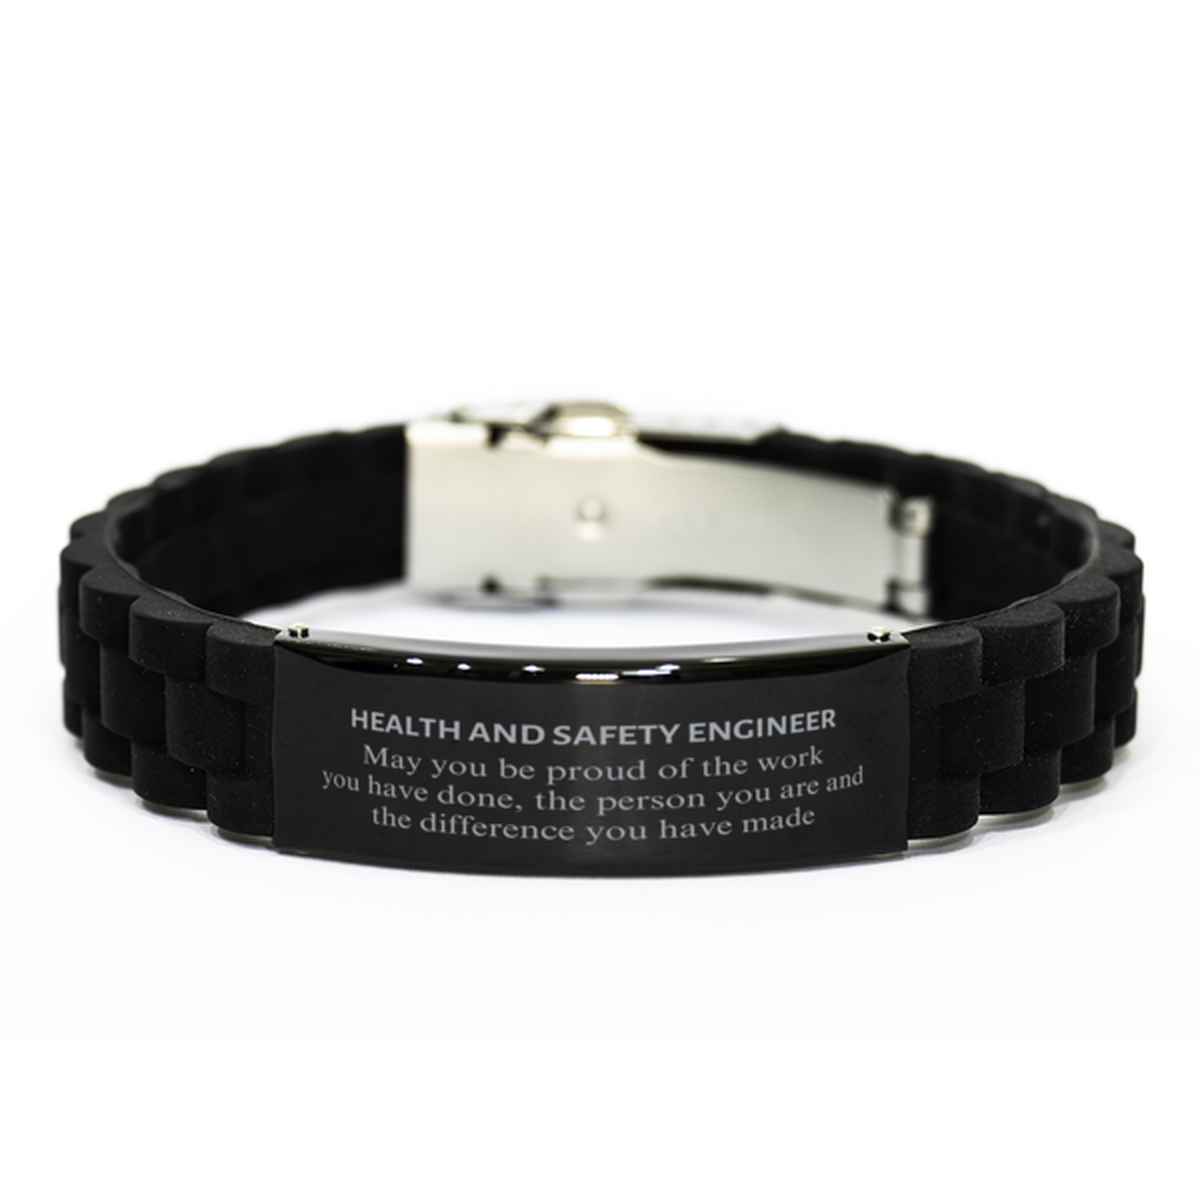 Health and Safety Engineer May you be proud of the work you have done, Retirement Health and Safety Engineer Black Glidelock Clasp Bracelet for Colleague Appreciation Gifts Amazing for Health and Safety Engineer